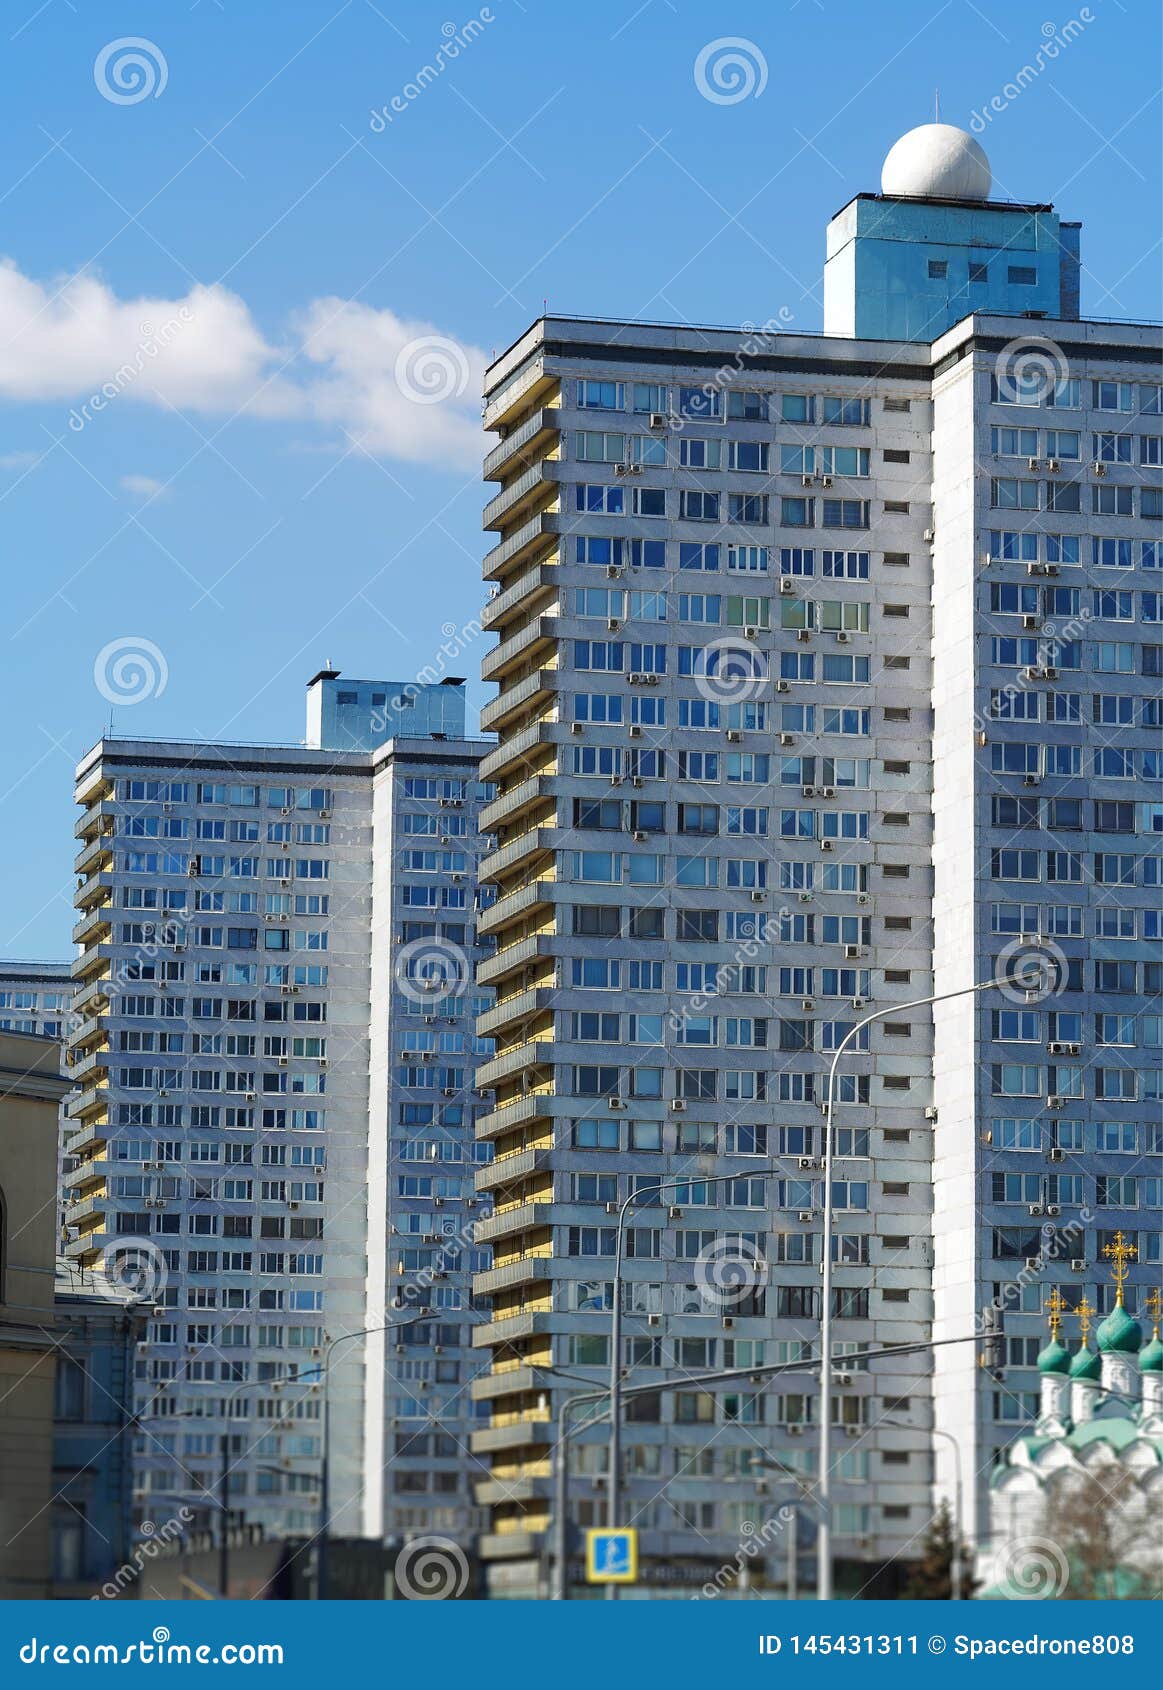 Buildings At Arbat Street In Moscow City Background Hd Stock Image Image Of Architecture Concept 145431311